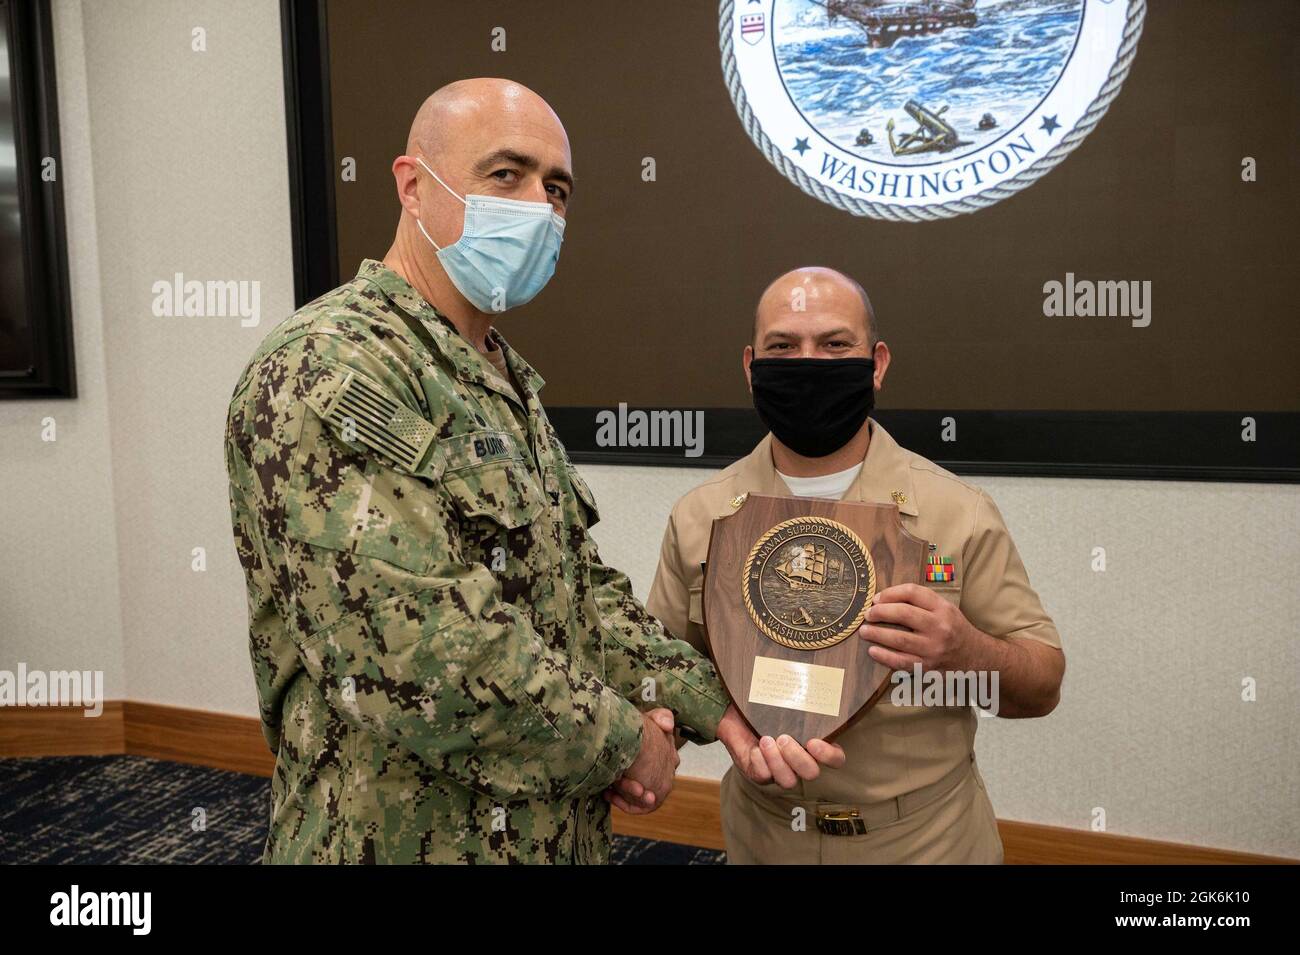 WASHINGTON, DC (Aug. 16, 2021) – Capt. Mark Burns (left), Naval Support Activity Washington commanding officer, presents Chief Navy Counselor Eduardo Rivera (right) with a commemorative plaque during an award ceremony held onboard Washington Navy Yard. Stock Photo